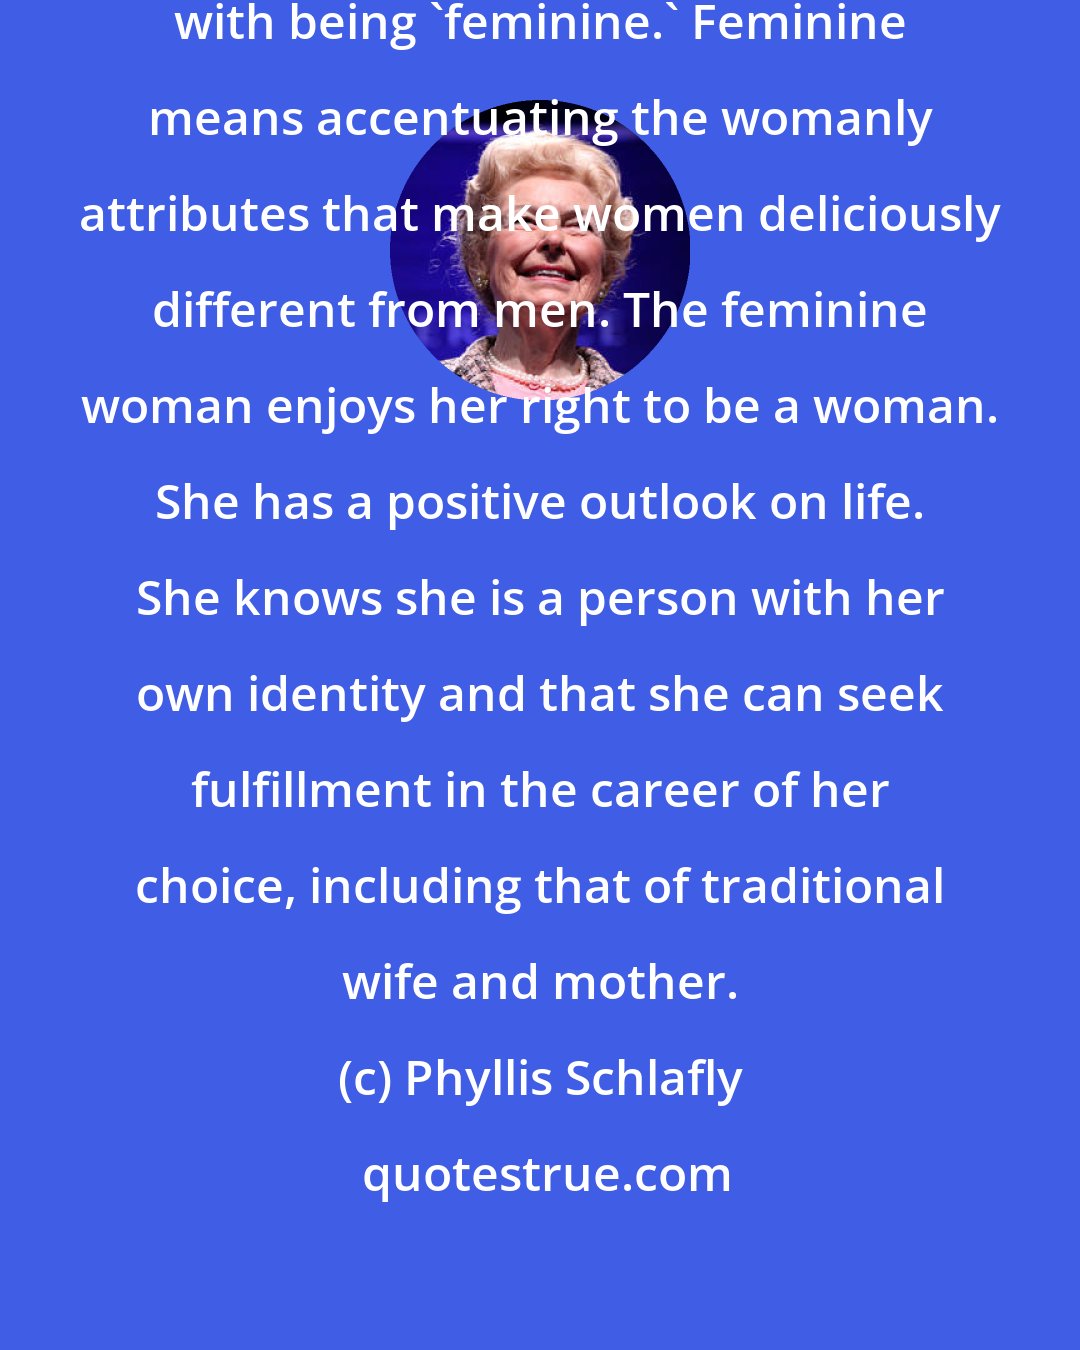 Phyllis Schlafly: Feminism has nothing at all to do with being 'feminine.' Feminine means accentuating the womanly attributes that make women deliciously different from men. The feminine woman enjoys her right to be a woman. She has a positive outlook on life. She knows she is a person with her own identity and that she can seek fulfillment in the career of her choice, including that of traditional wife and mother.